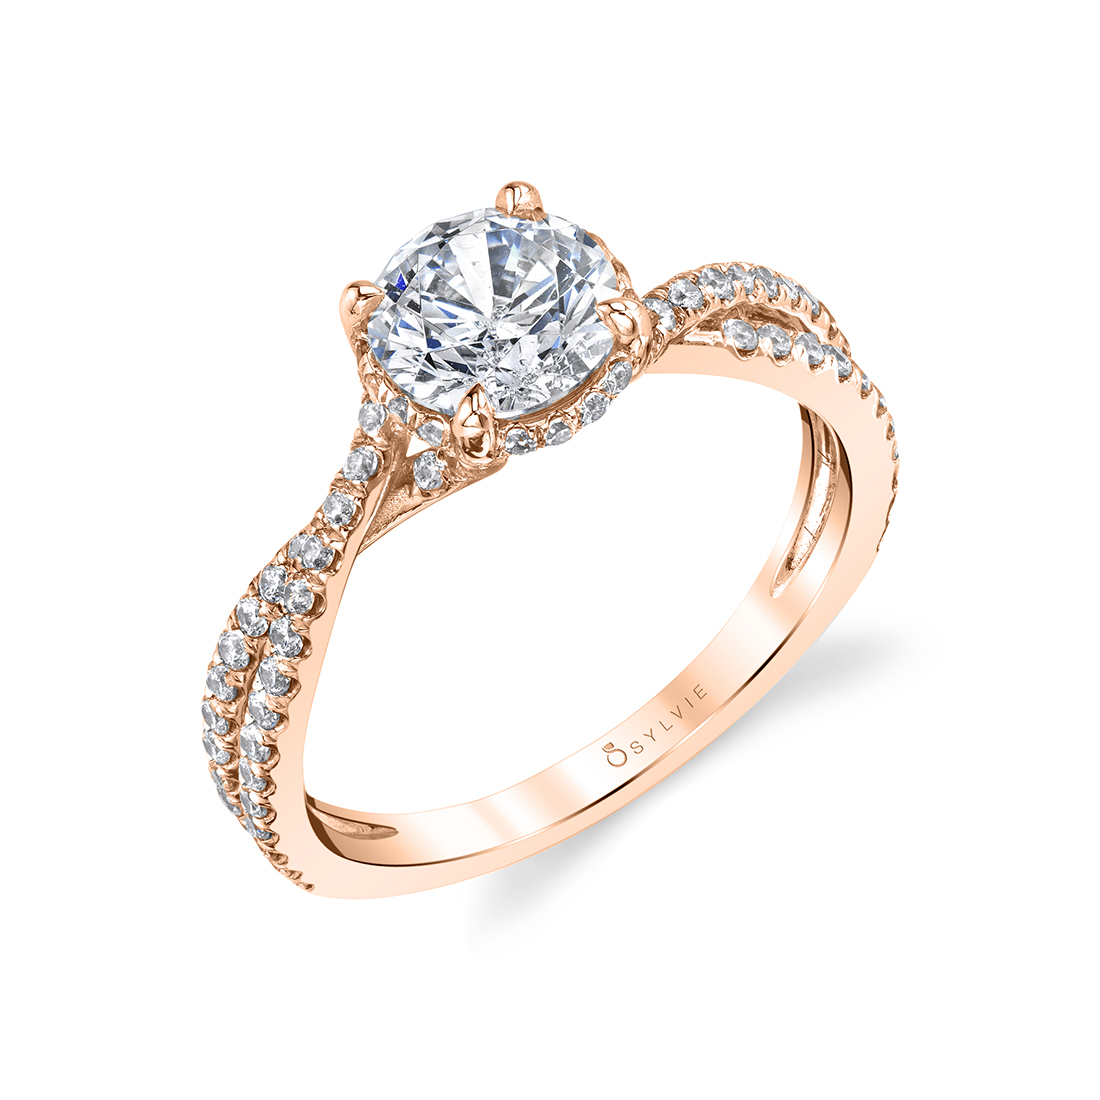 Hidden Halo Engagement Ring in Rose Gold - Mia